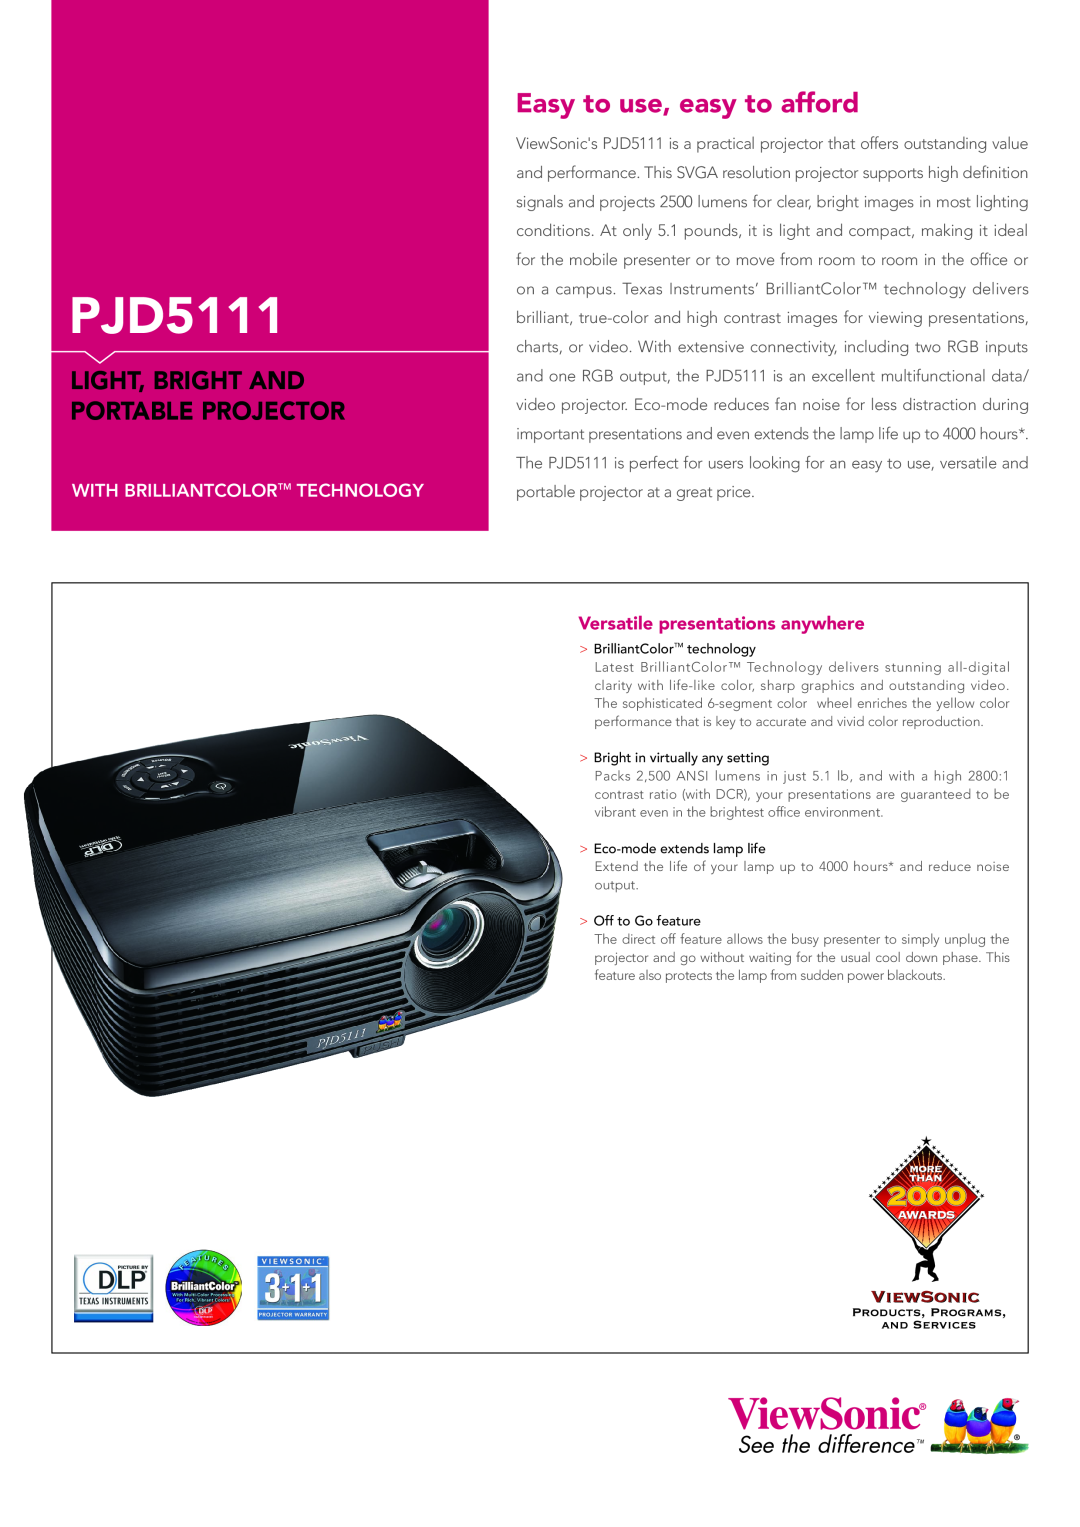 ViewSonic PJD5111 manual Easy to use, easy to afford, Light, Bright And Portable Projector, See the difference TM 